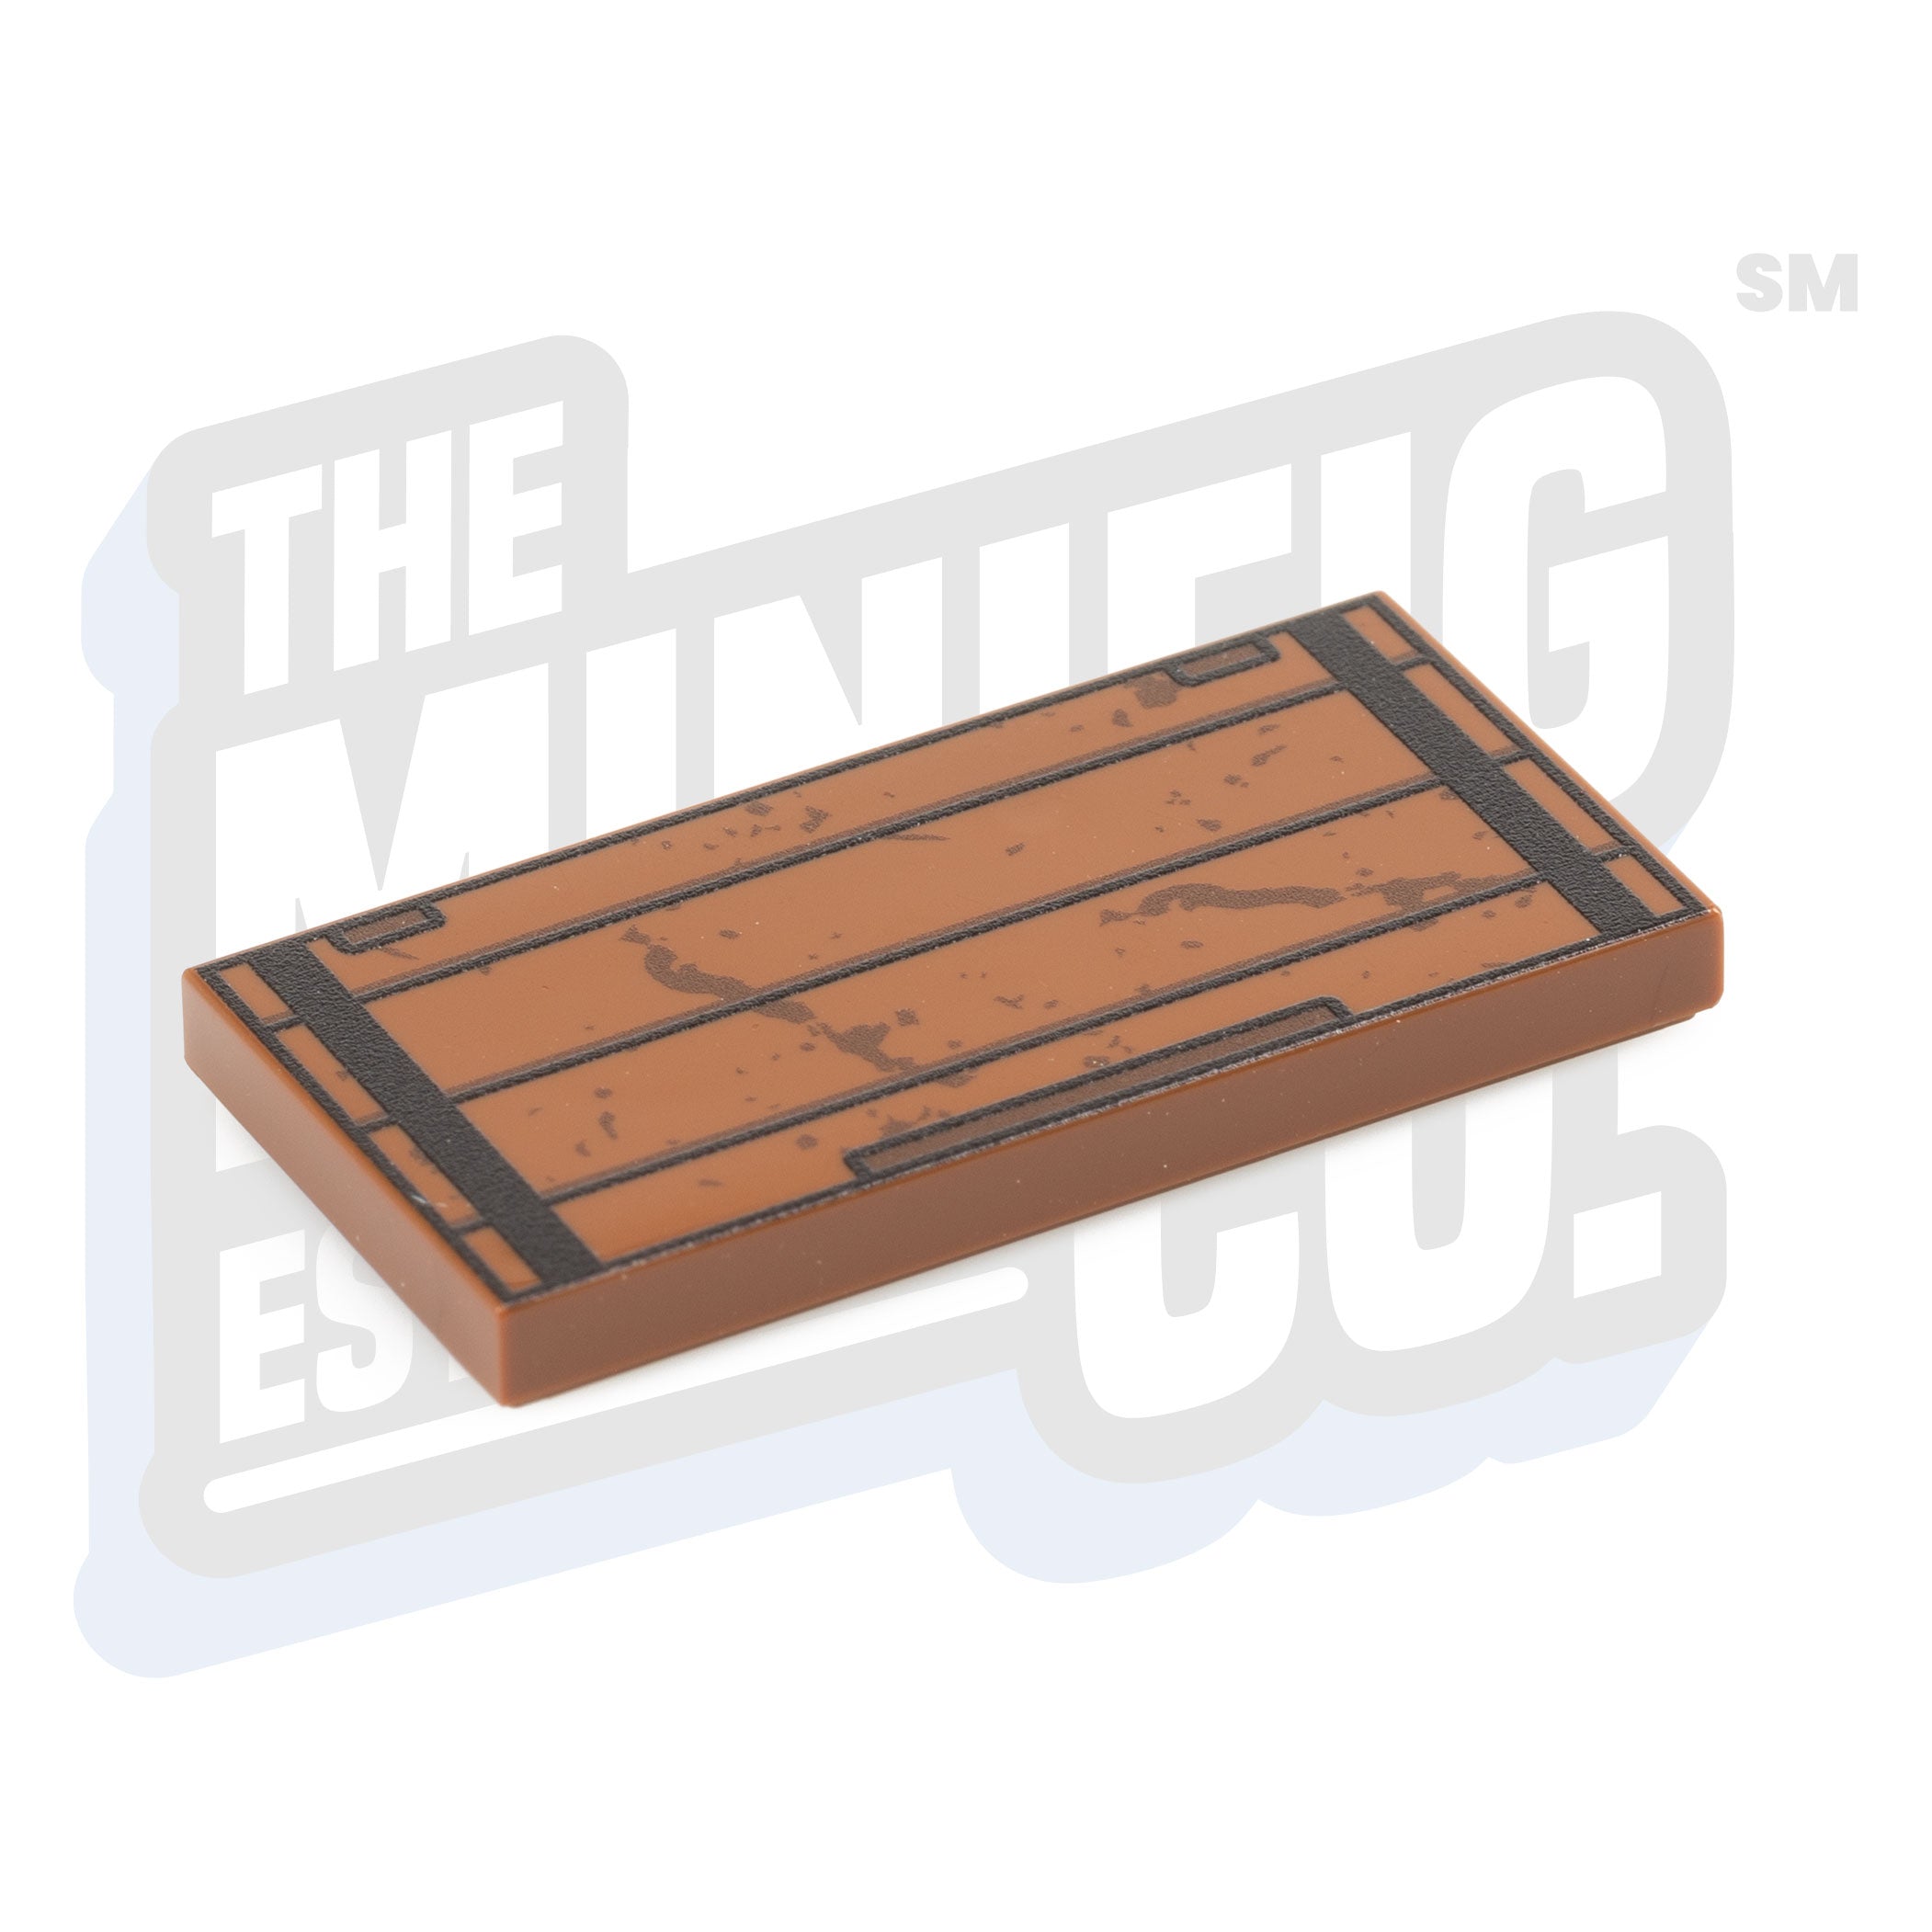 Crate Lid Tile (2x4) - The Minifig Co.